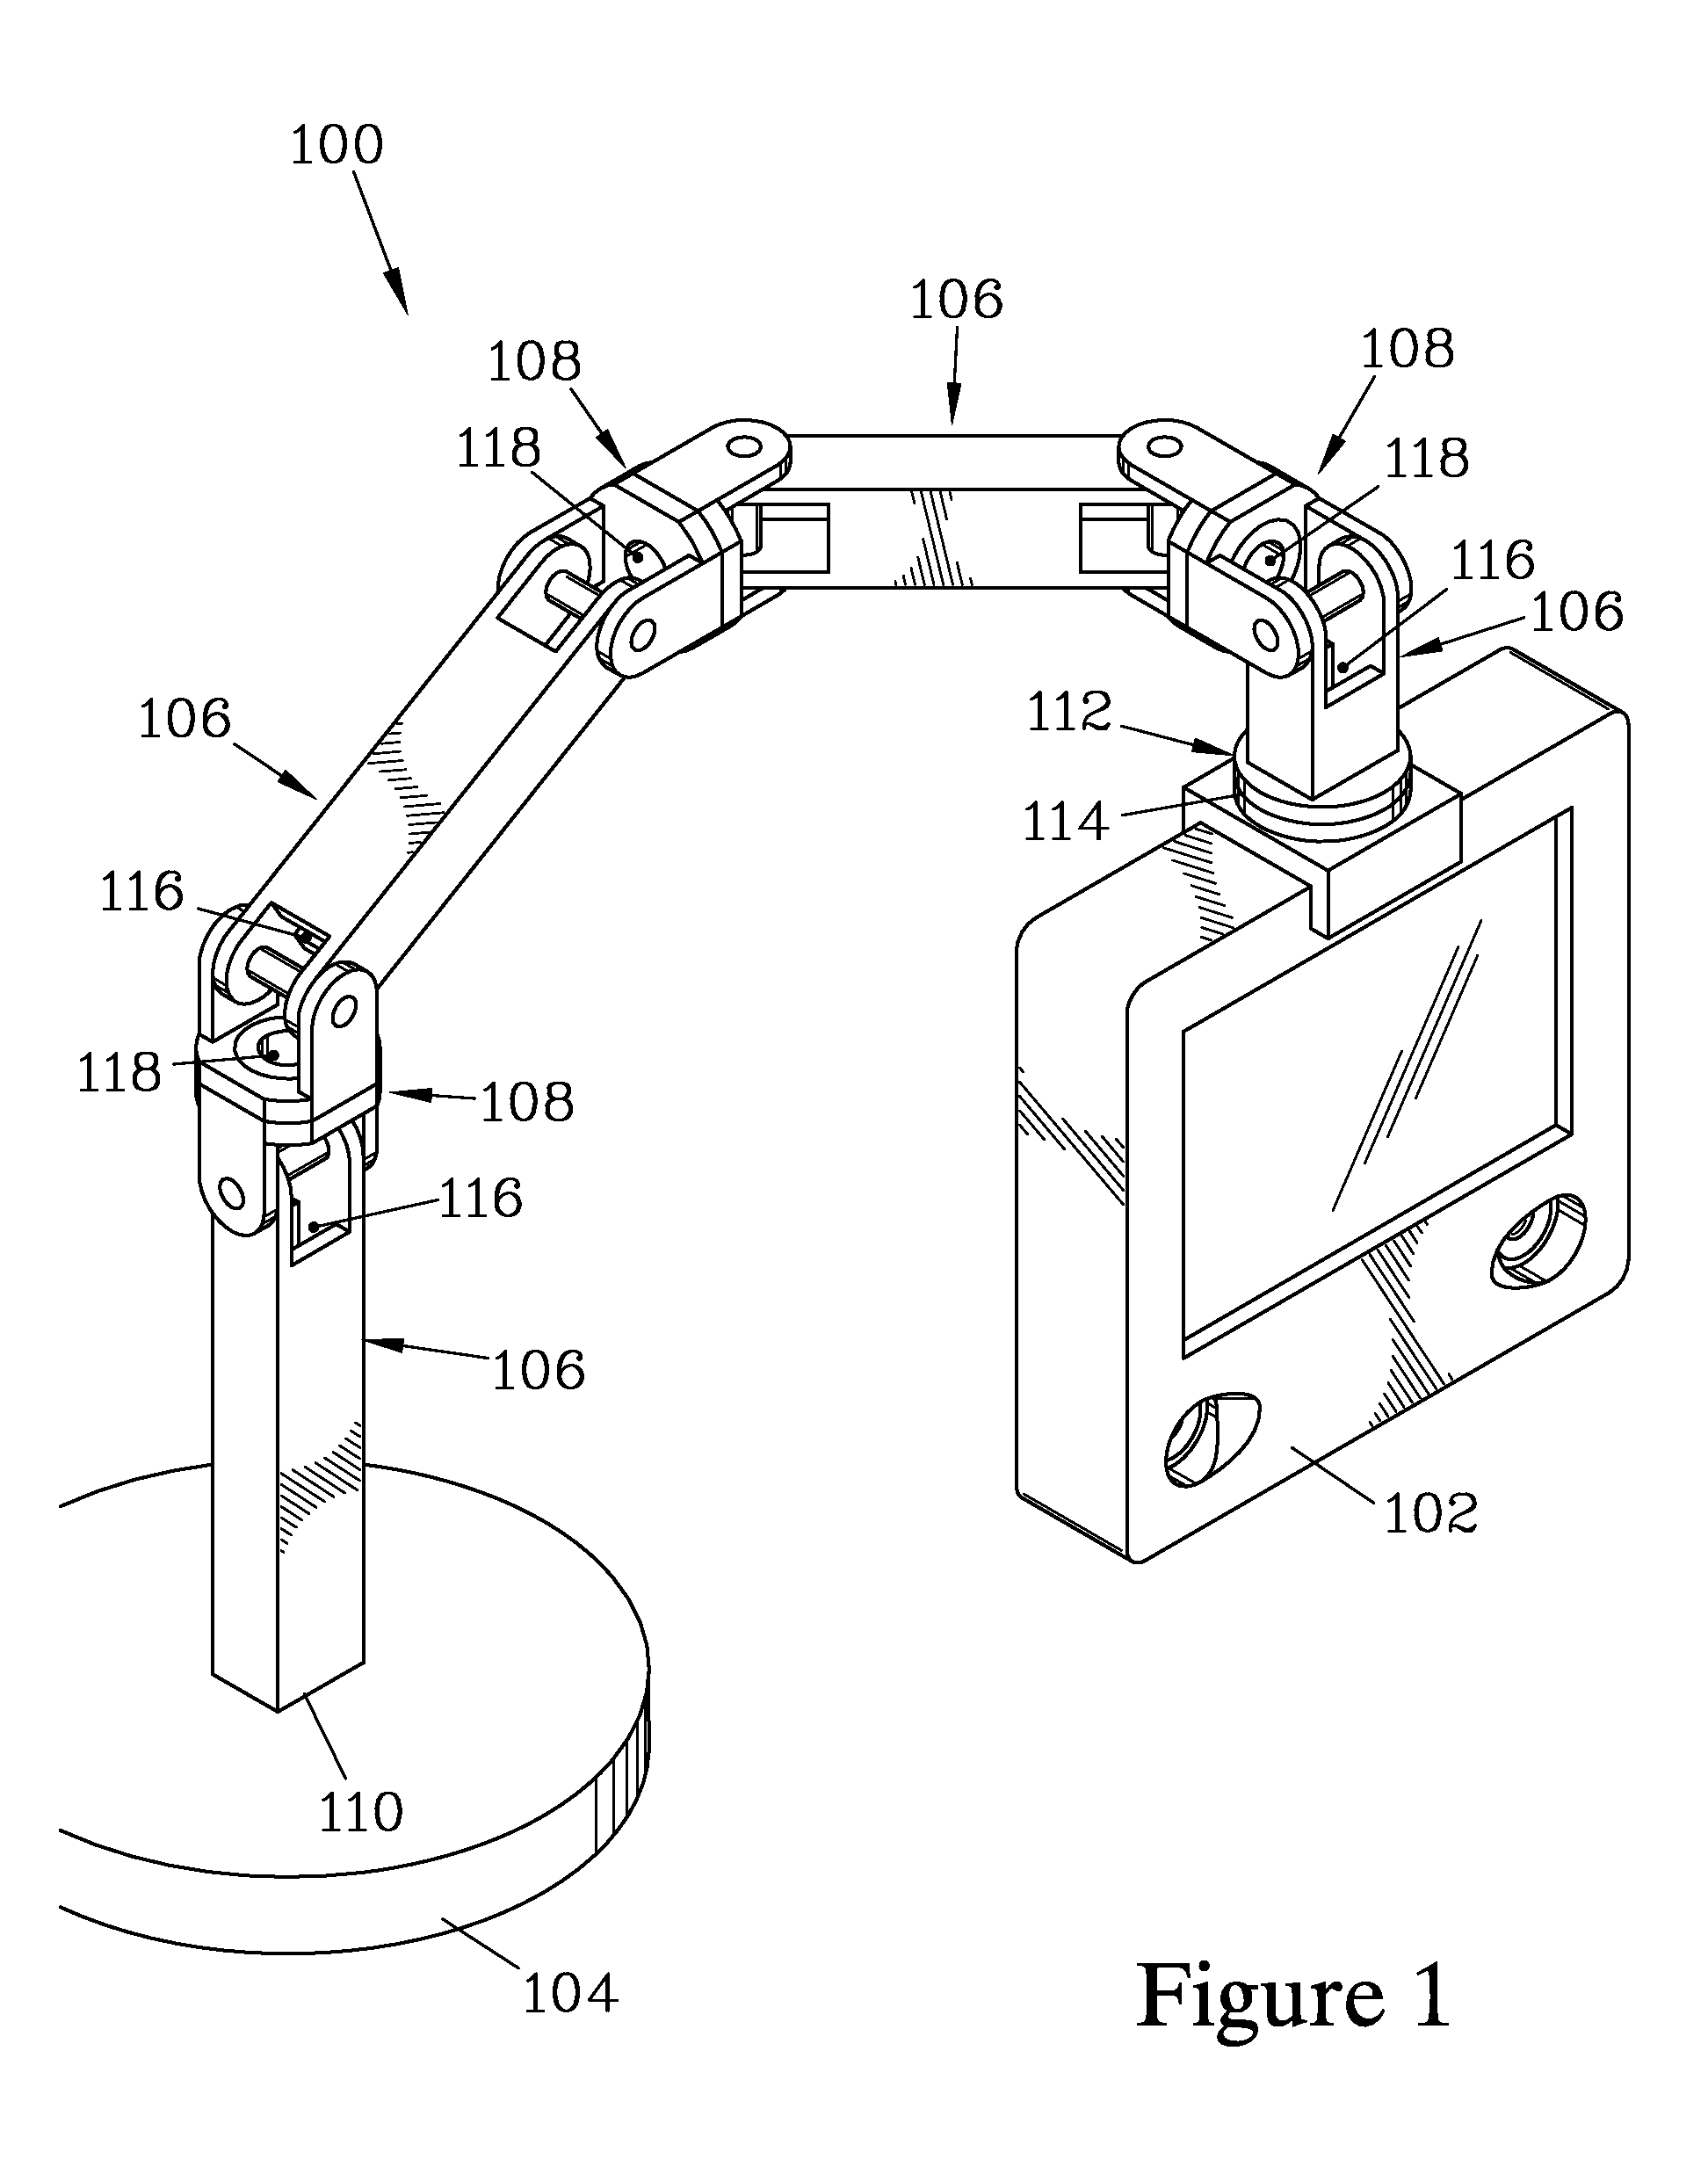 Adjustable support arm for audio visual device